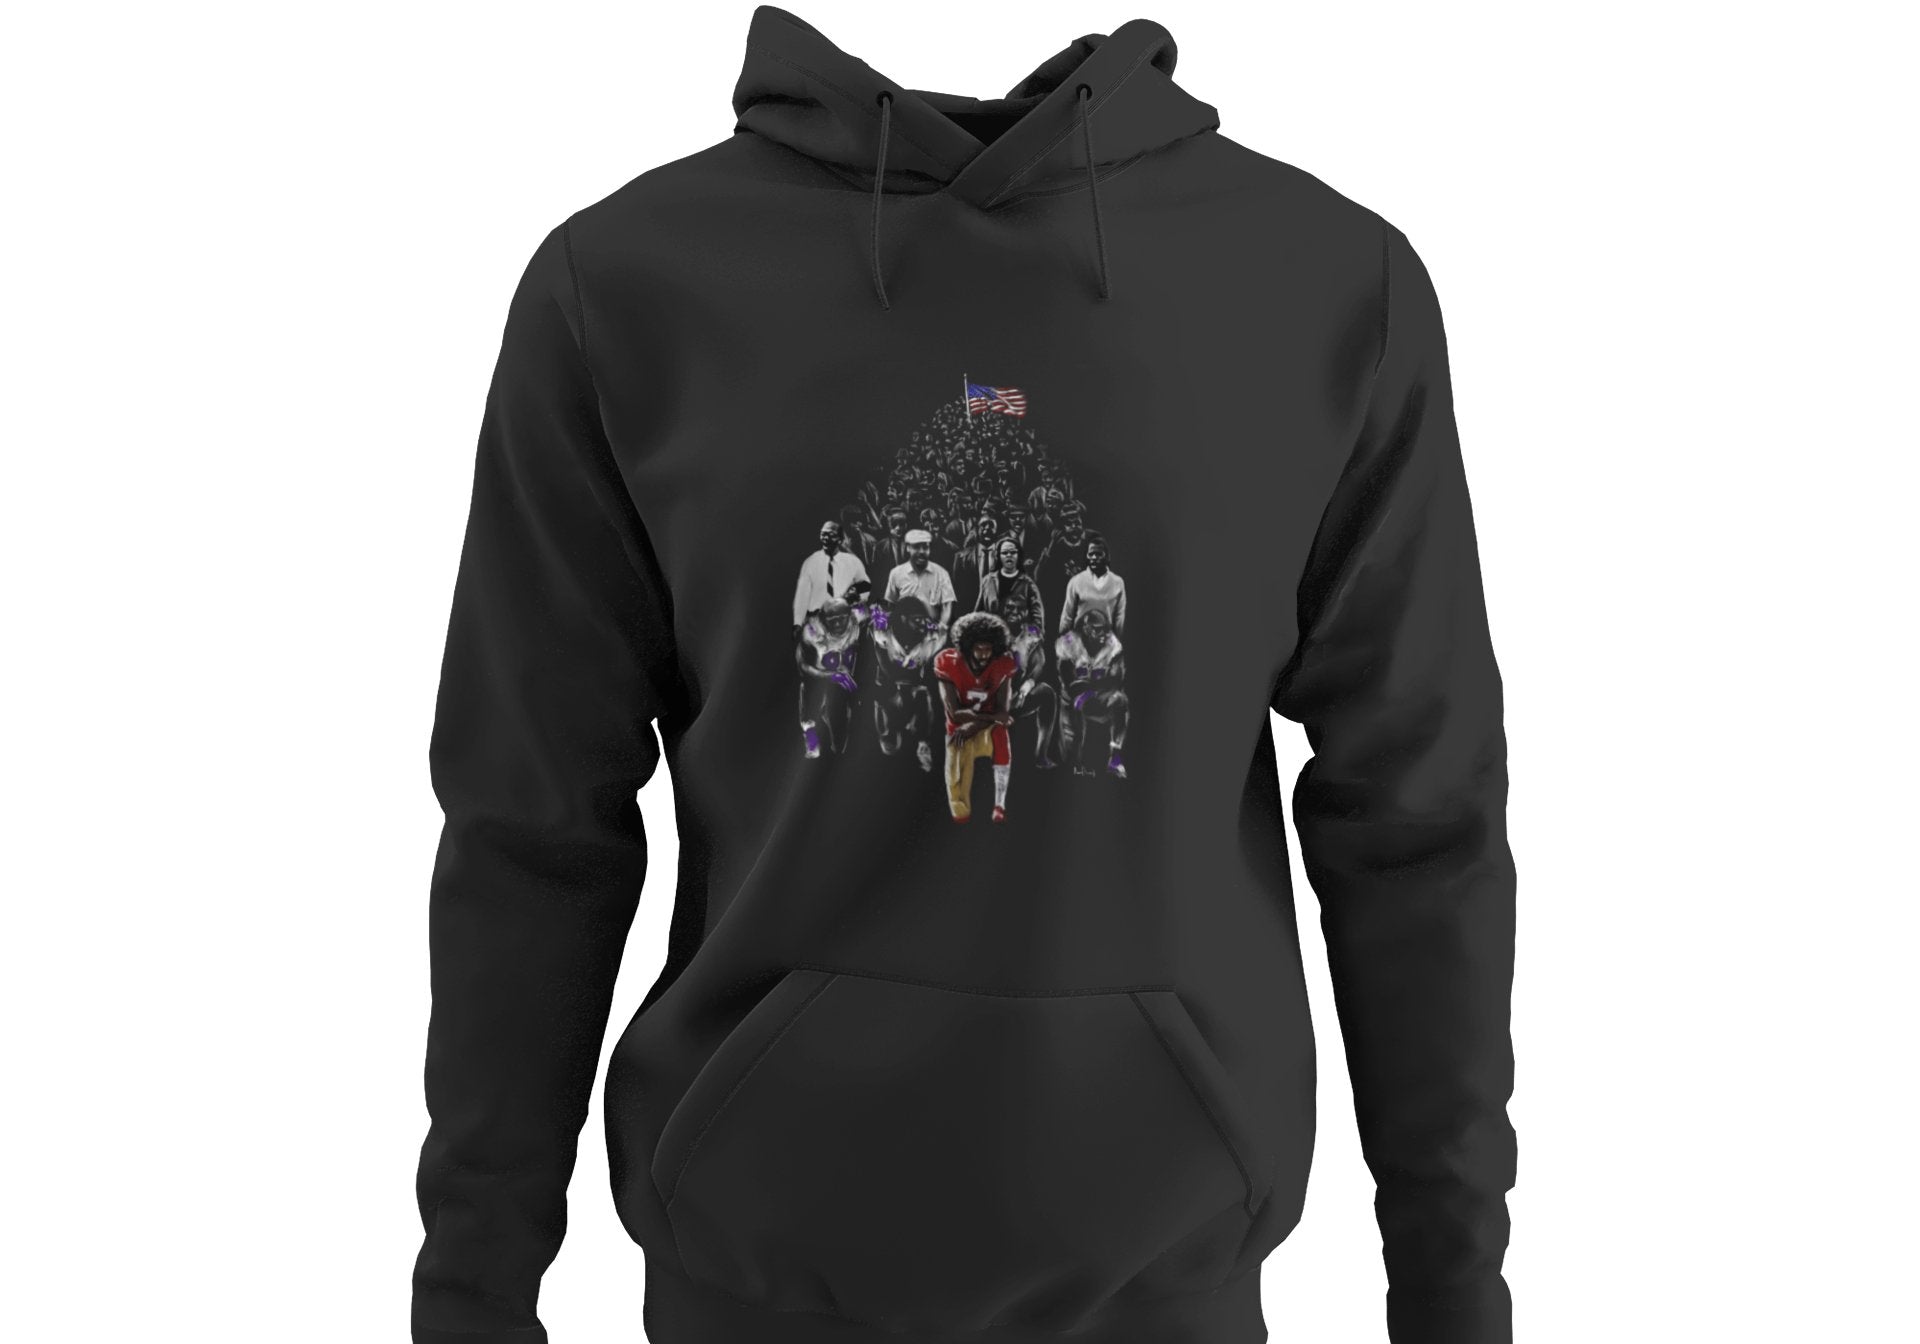 Colin Kaepernick | Then and Now | Unisex Hoodie - Androo's Art